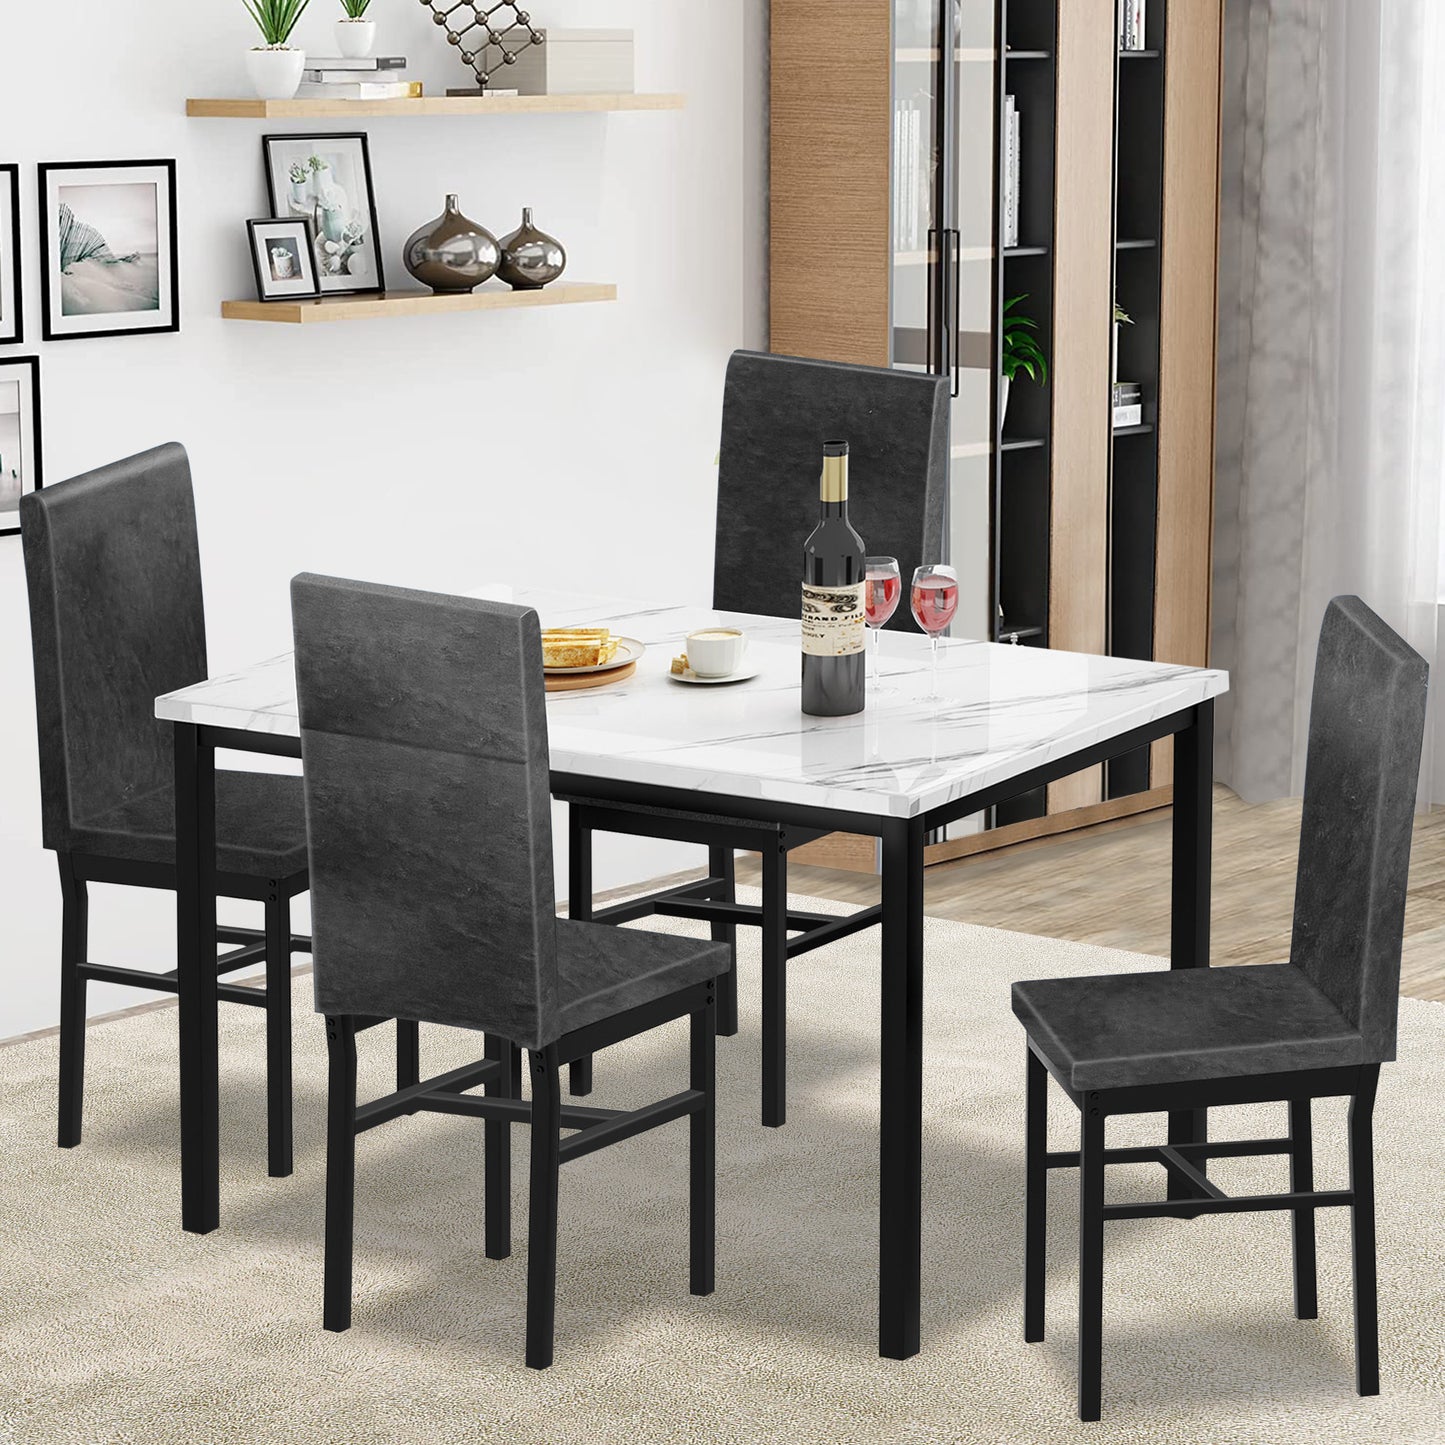 5 Piece Dining Set, Modern Dining Table and Chairs Set for 4, Kitchen Dining Table Set with Faux Marble Tabletop and 4 Velvet Fabric Upholstered Chairs, for Small Space, Breakfast Nook, D8919